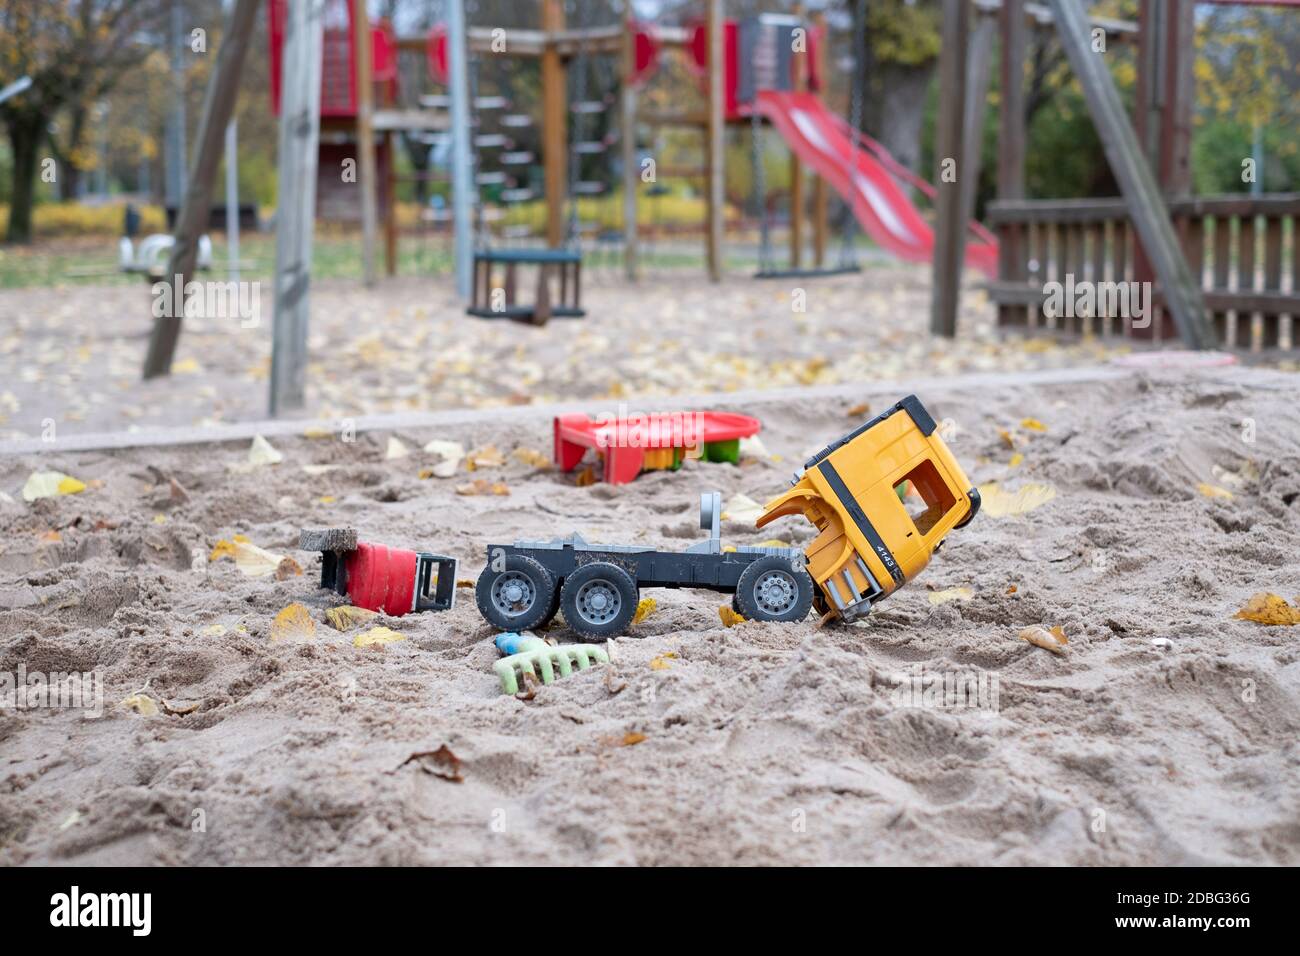 Deserted playground in a city park with broken kids toys during COVID-19 lockdown. Corona virus social distancing restrictions. Empty park. Stock Photo